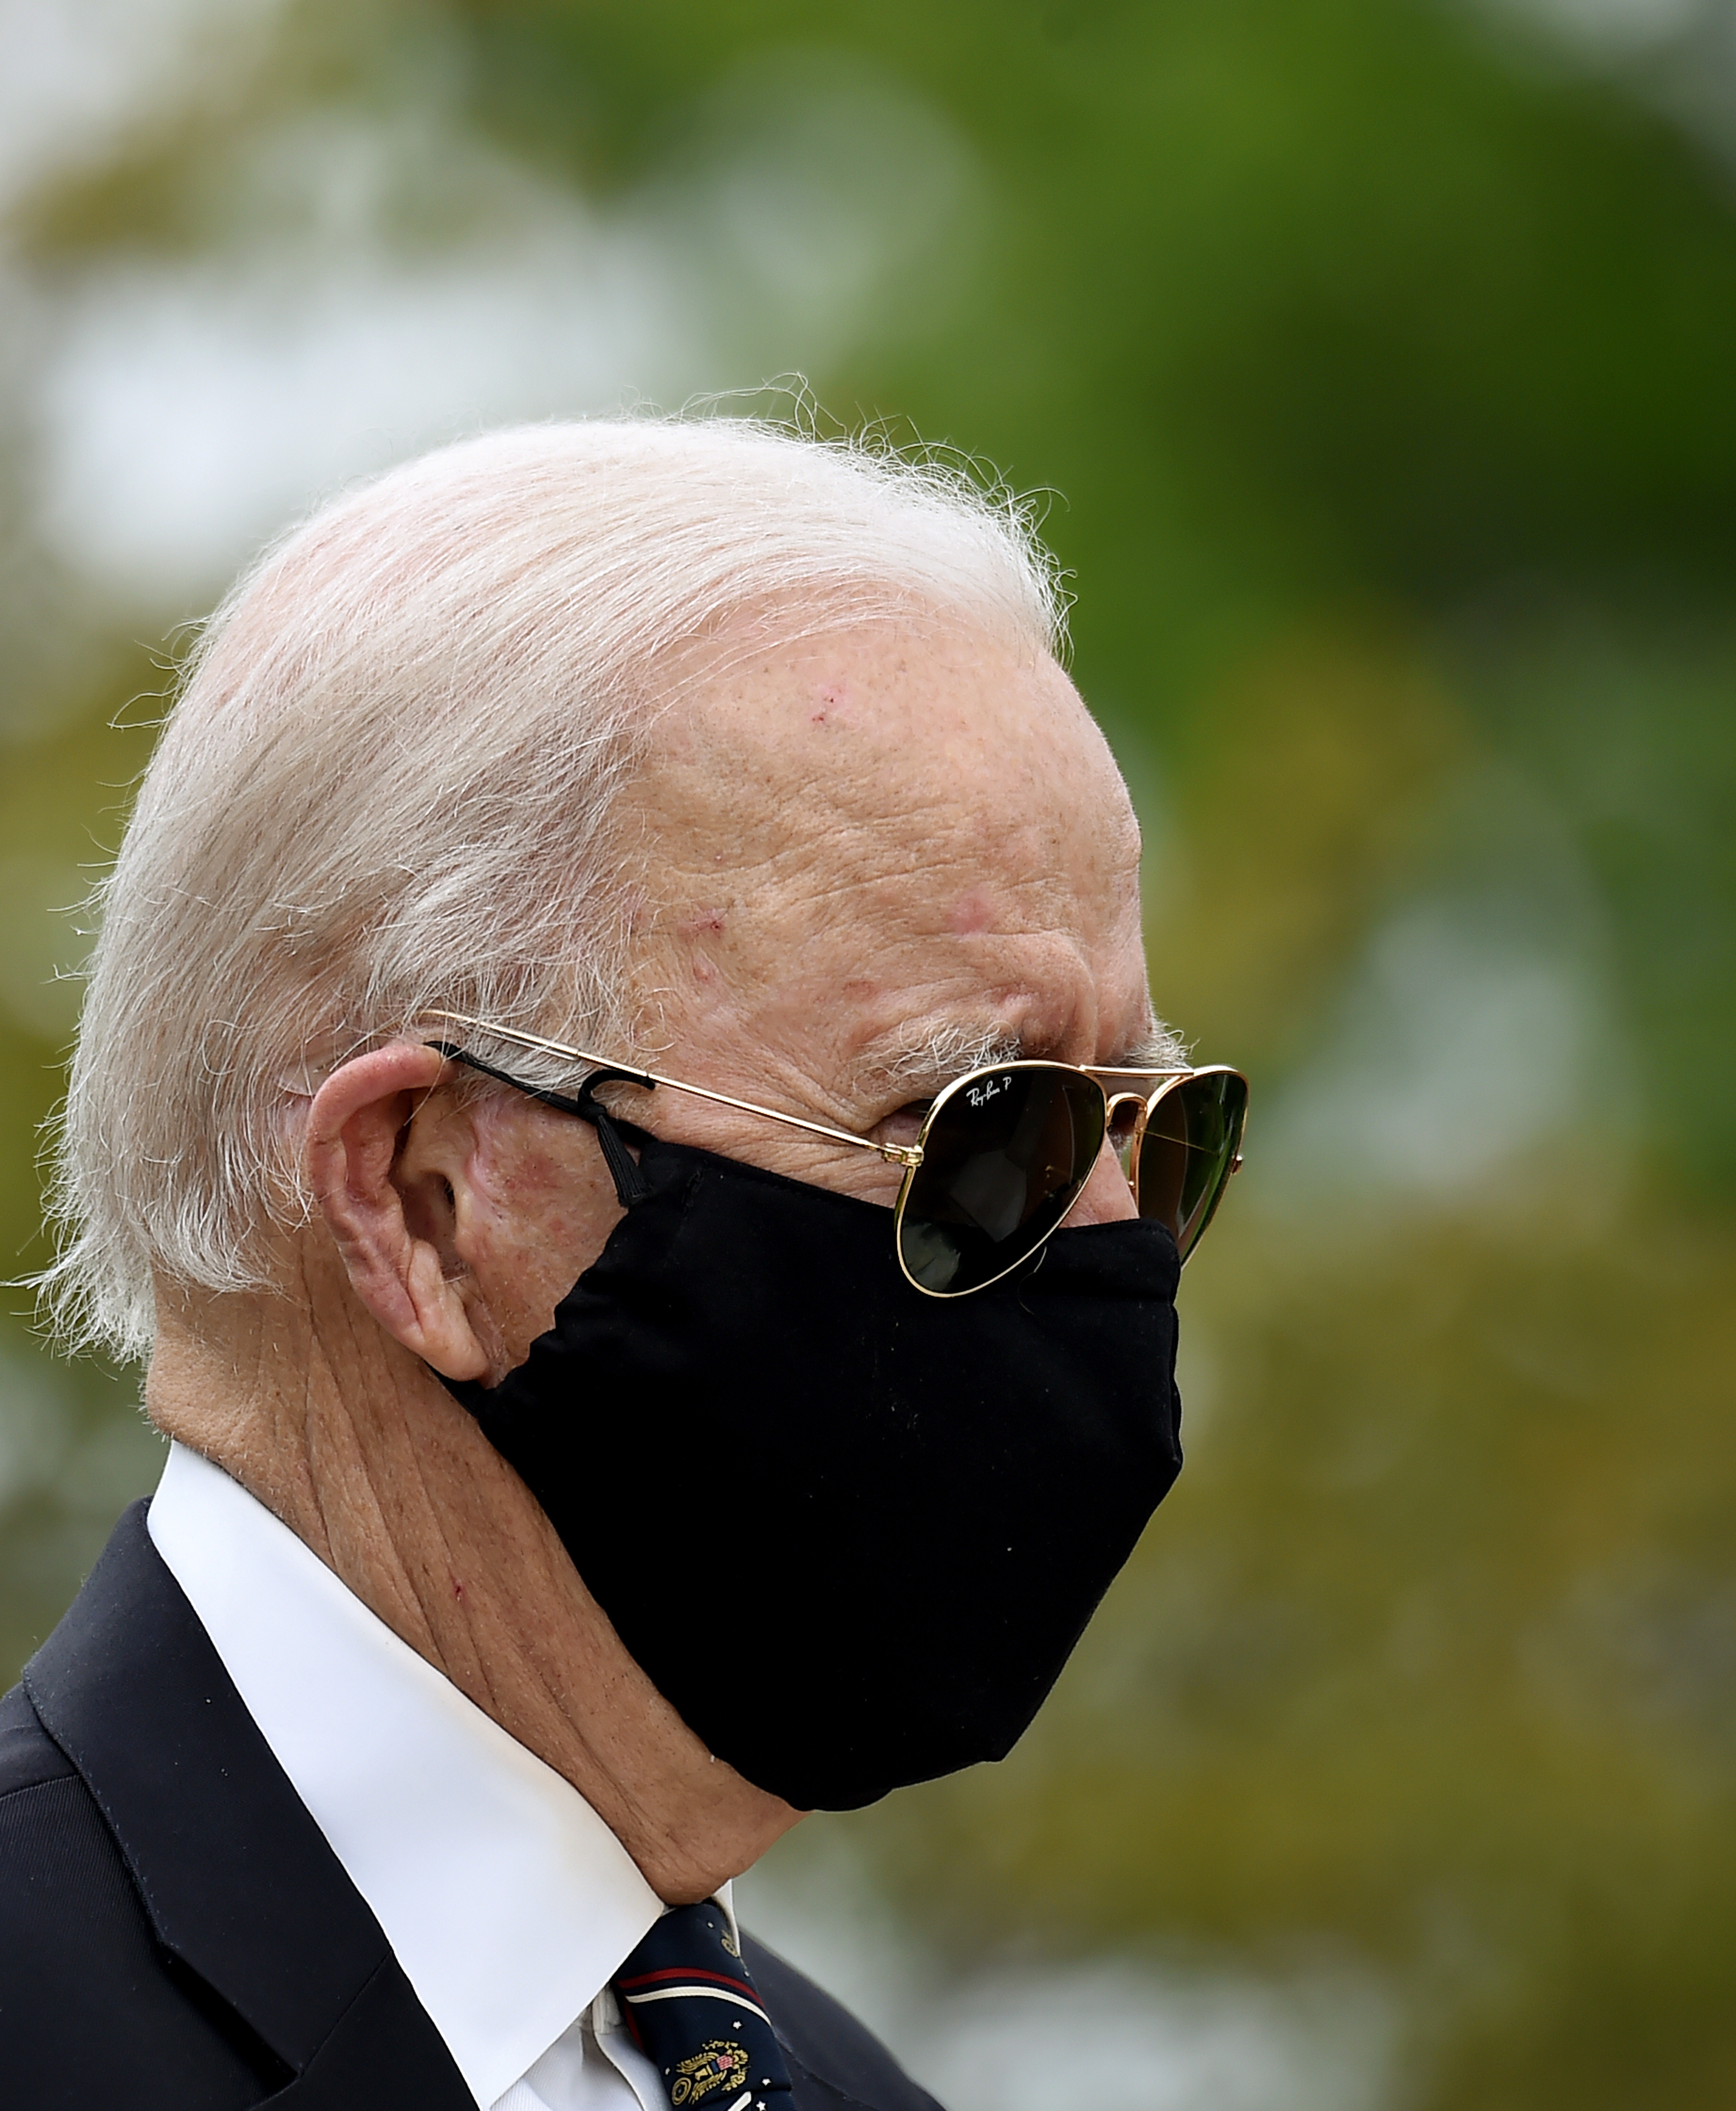 Democratic presidential candidate and former US Vice President Joe Biden arrives to pay his respects to fallen service members on Memorial Day at Delaware Memorial Bridge Veteran's Memorial Park in Newcastle, Delaware, May 25, 2020. (Photo by Olivier DOULIERY / AFP) (Photo by OLIVIER DOULIERY/AFP via Getty Images)